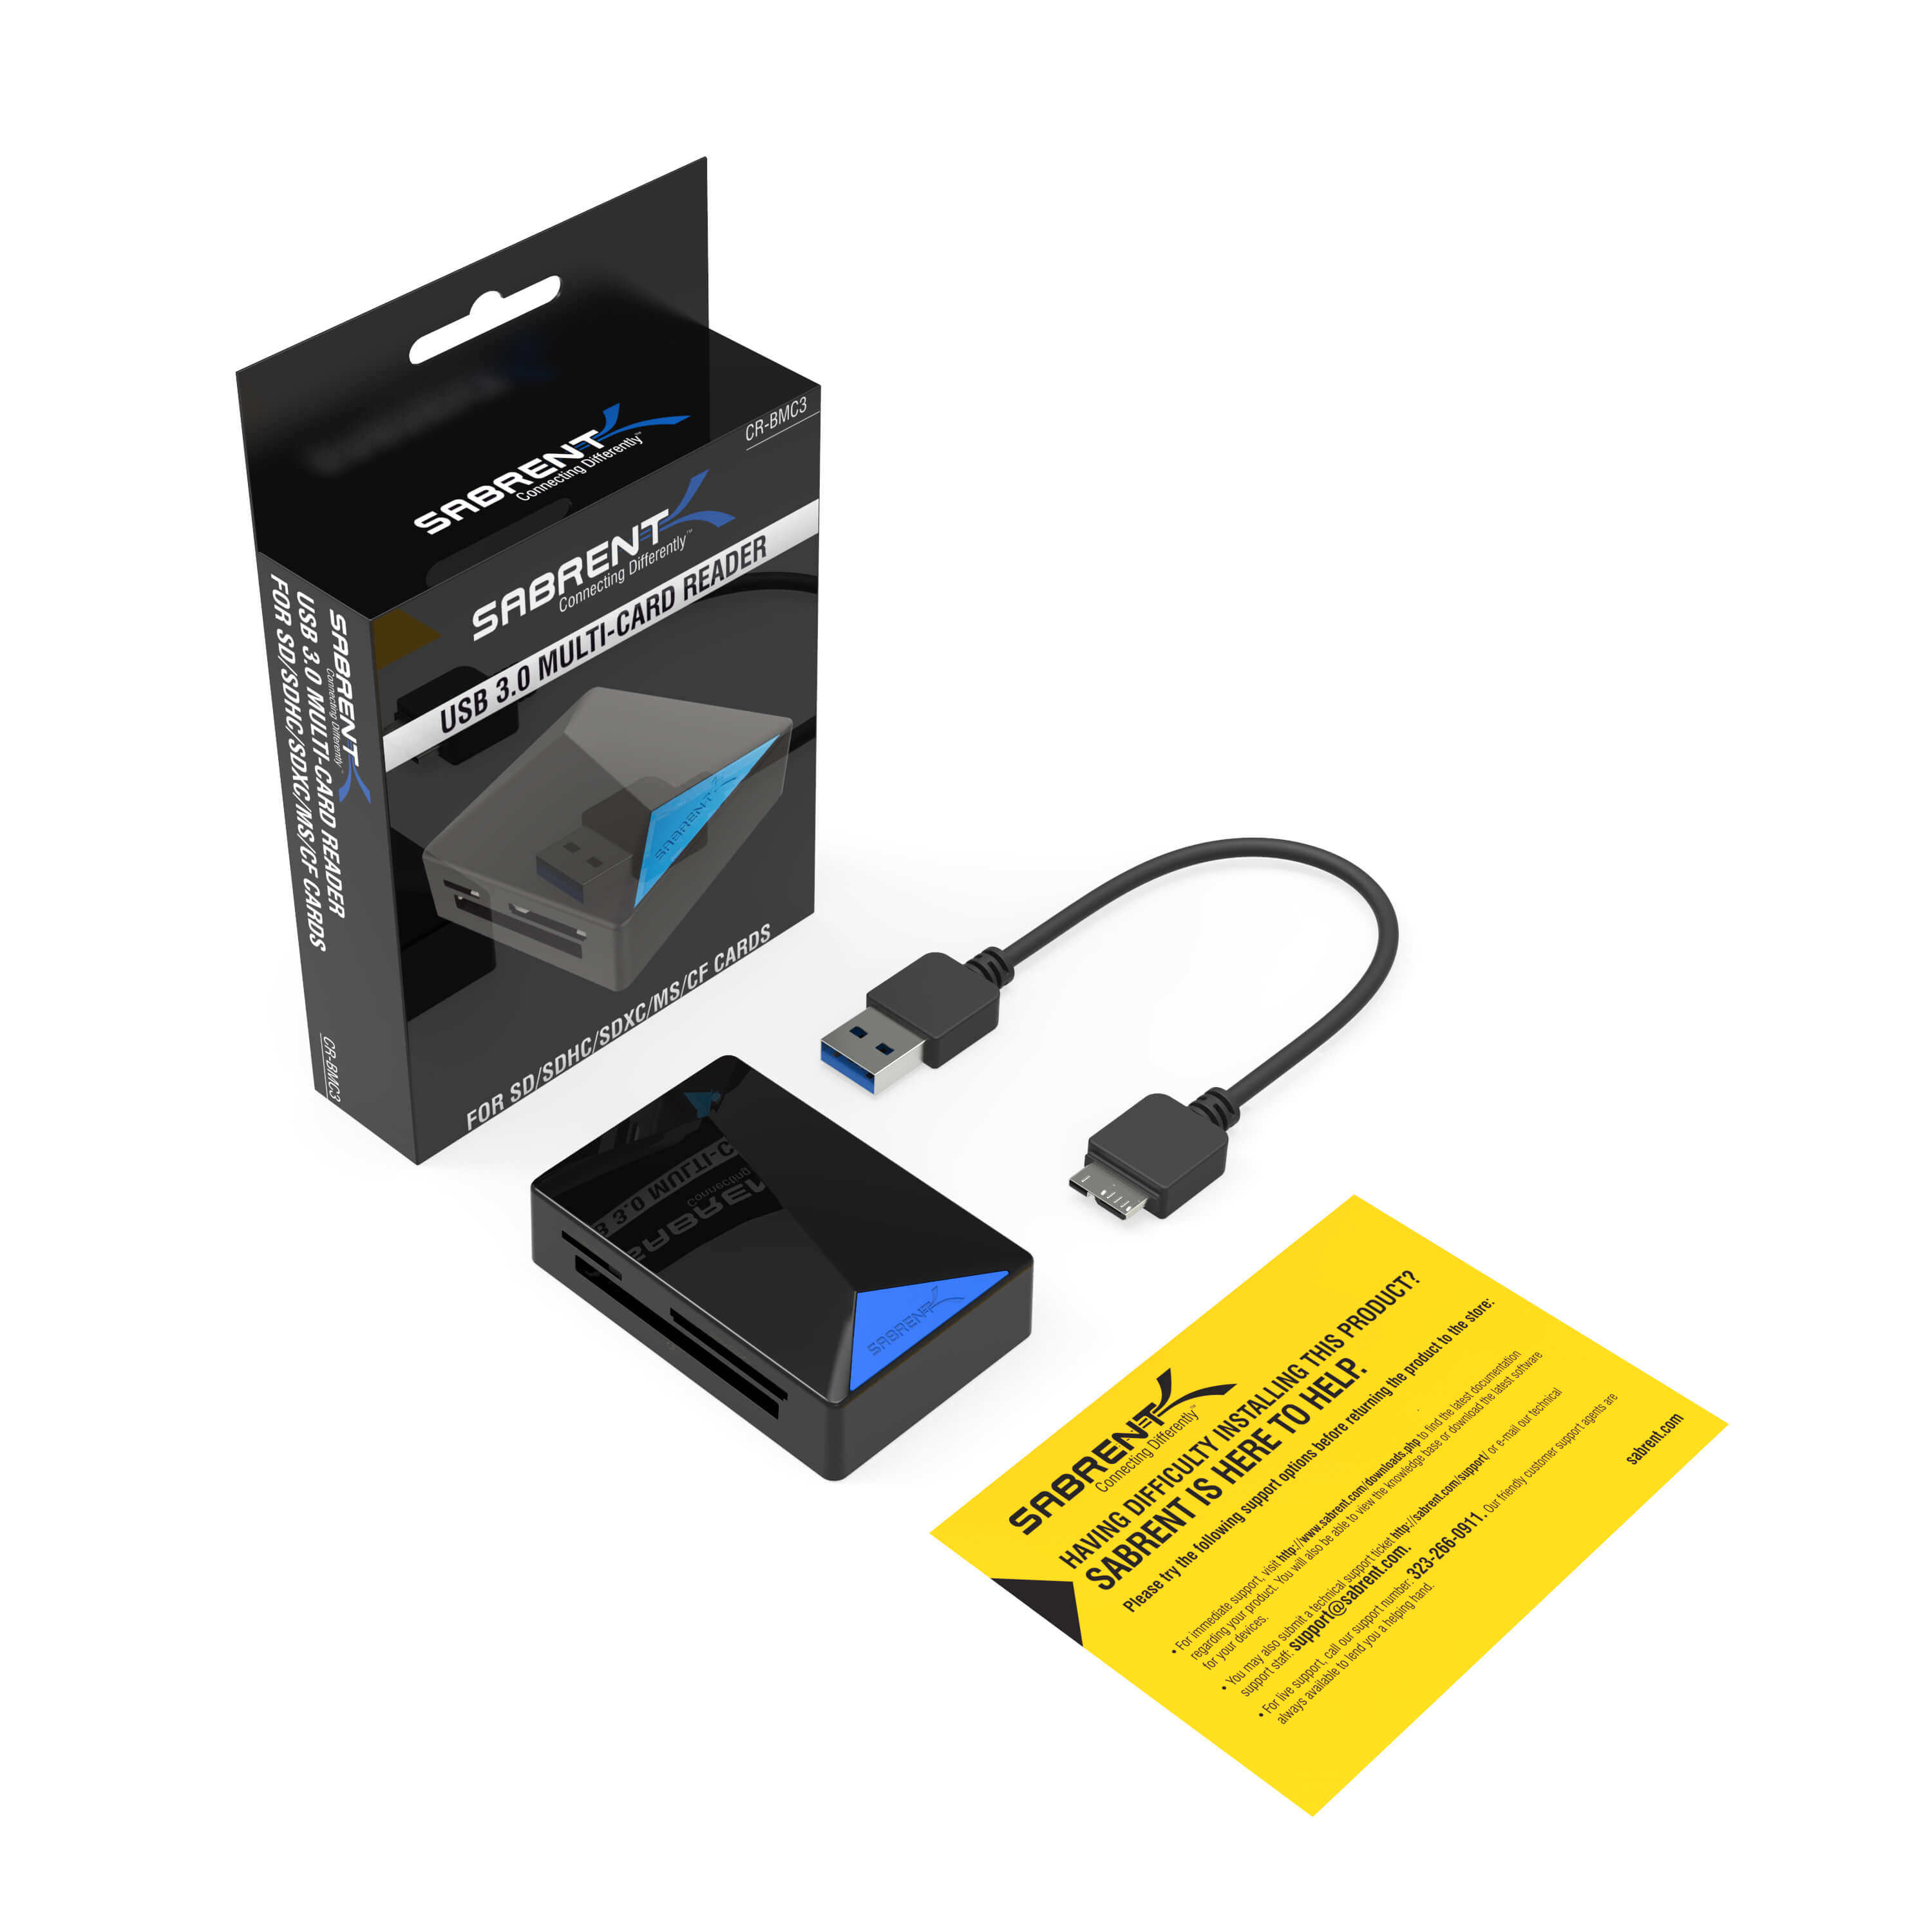 Usb 3.0 Driver Download For Mac